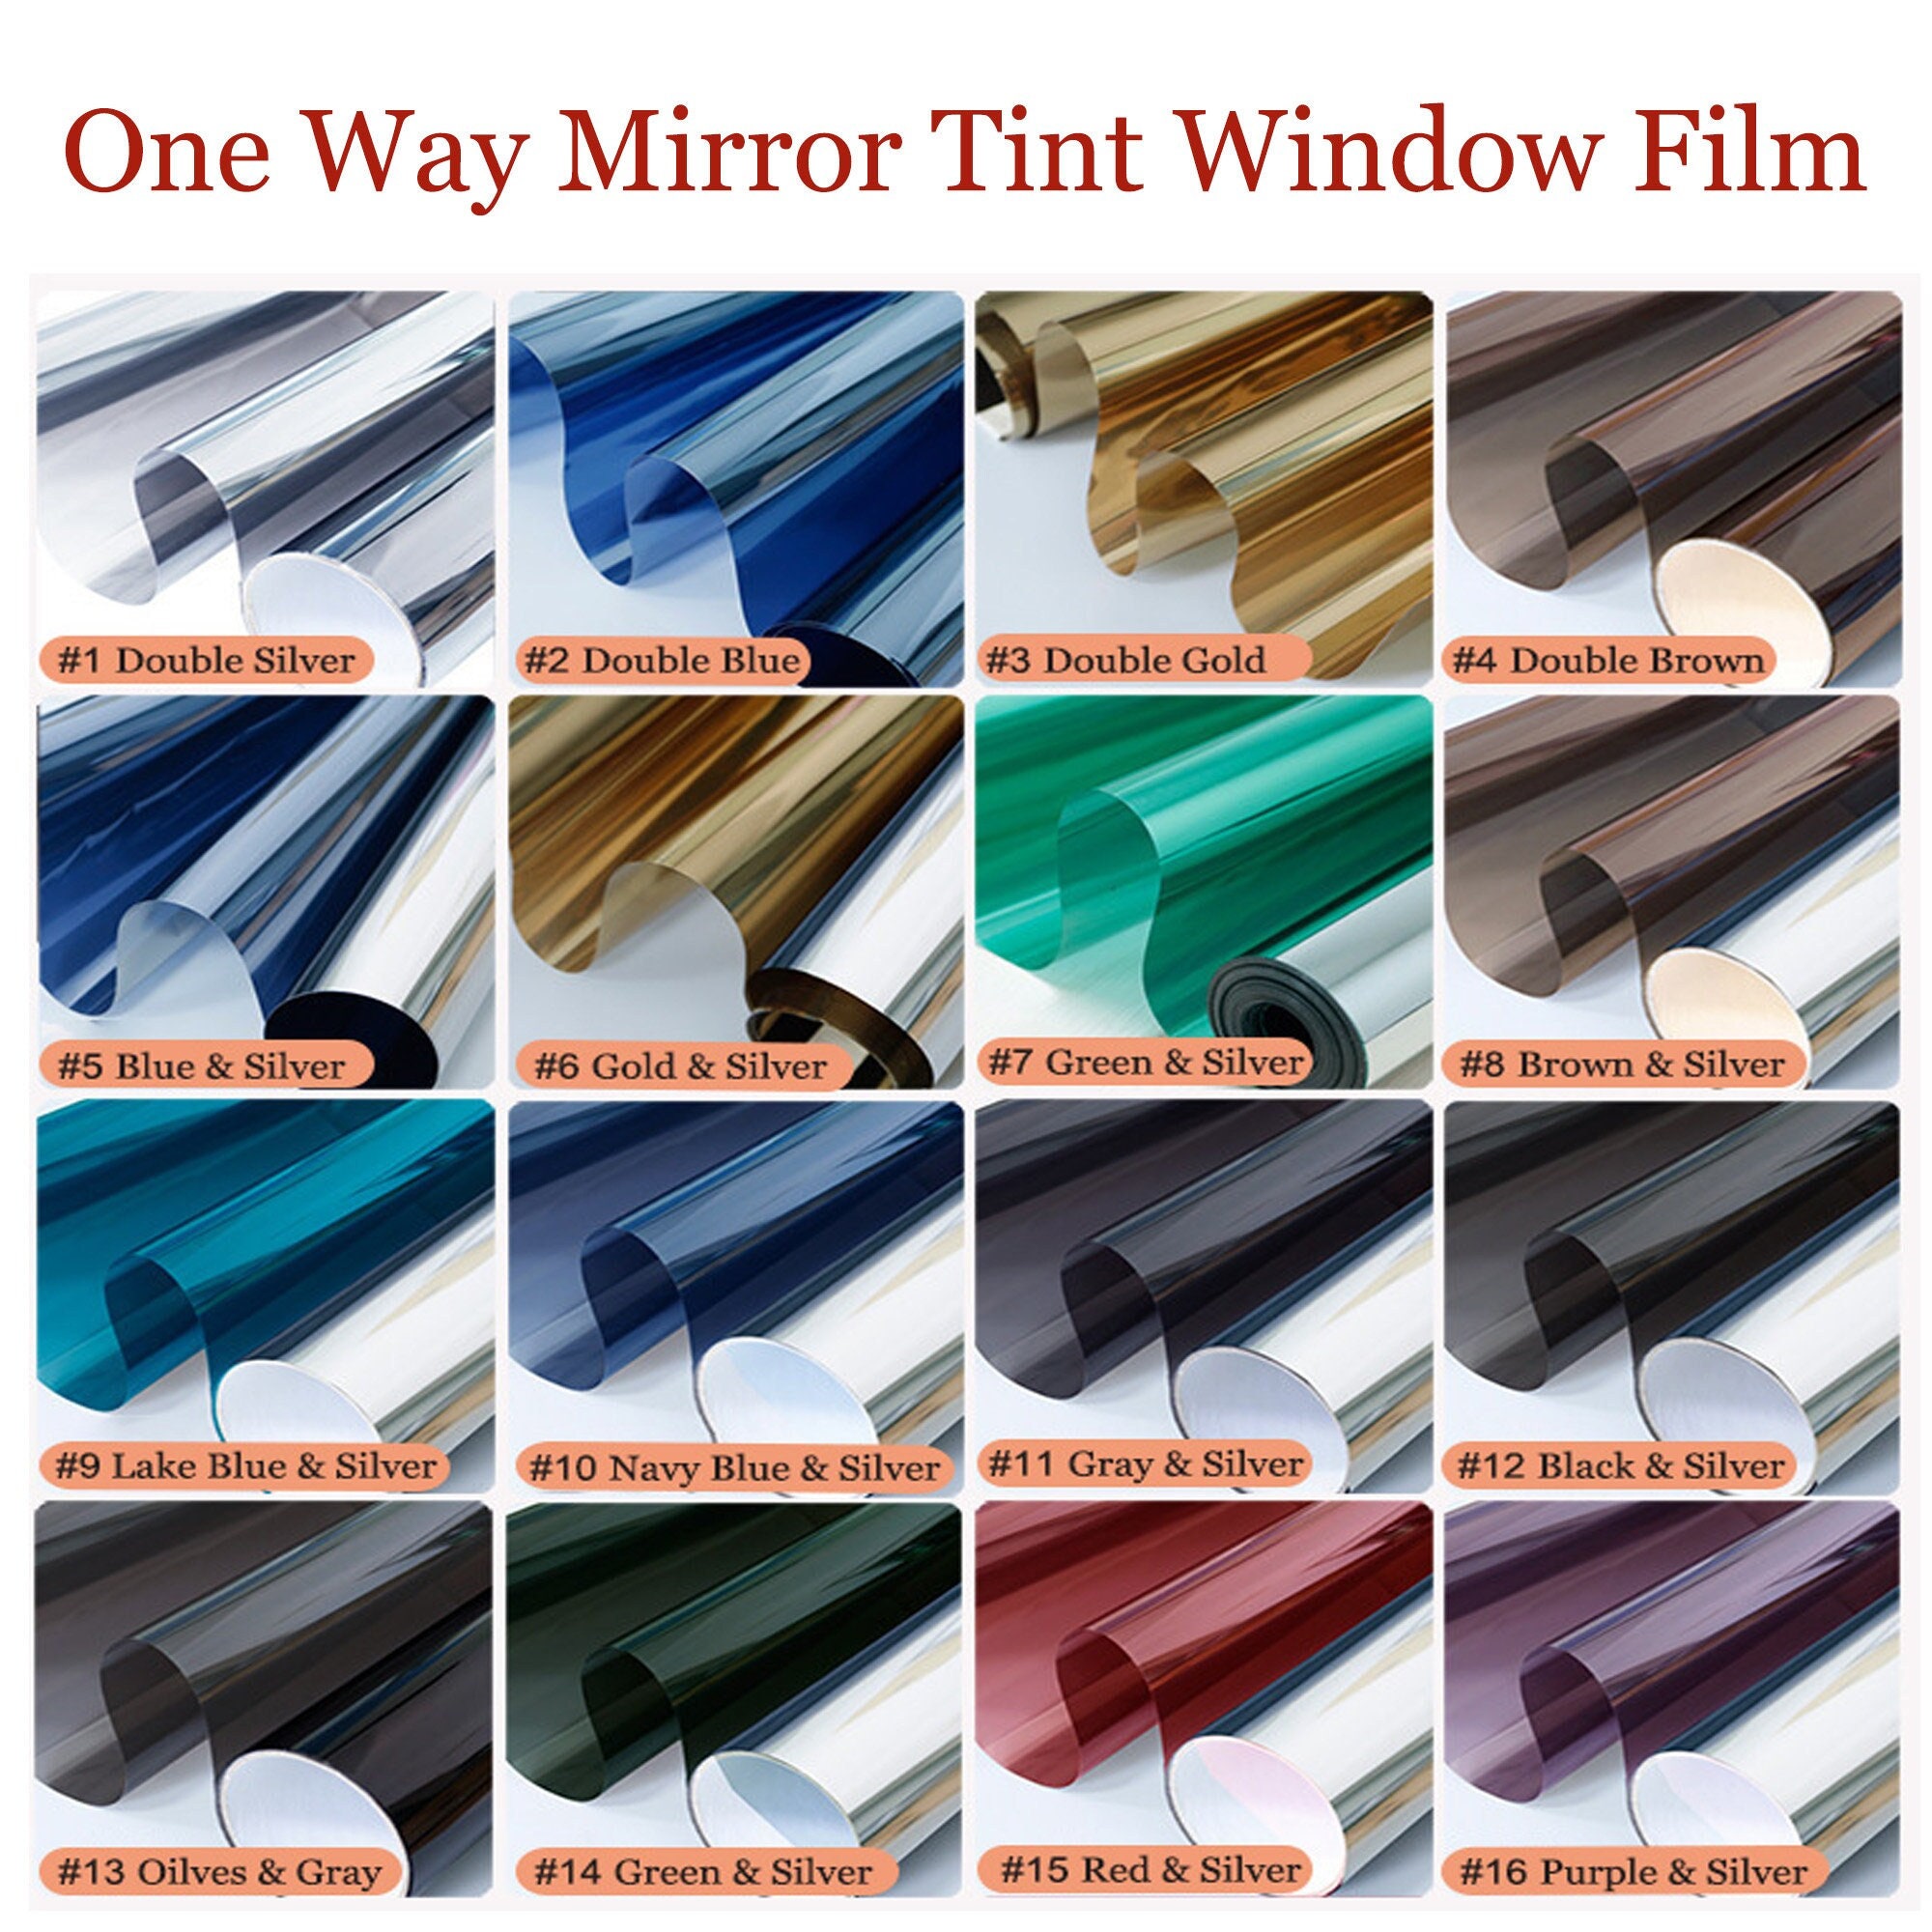 Mylar Film Used to Create a Glassless Mirror for Dance Studios, Schools,  and More. 